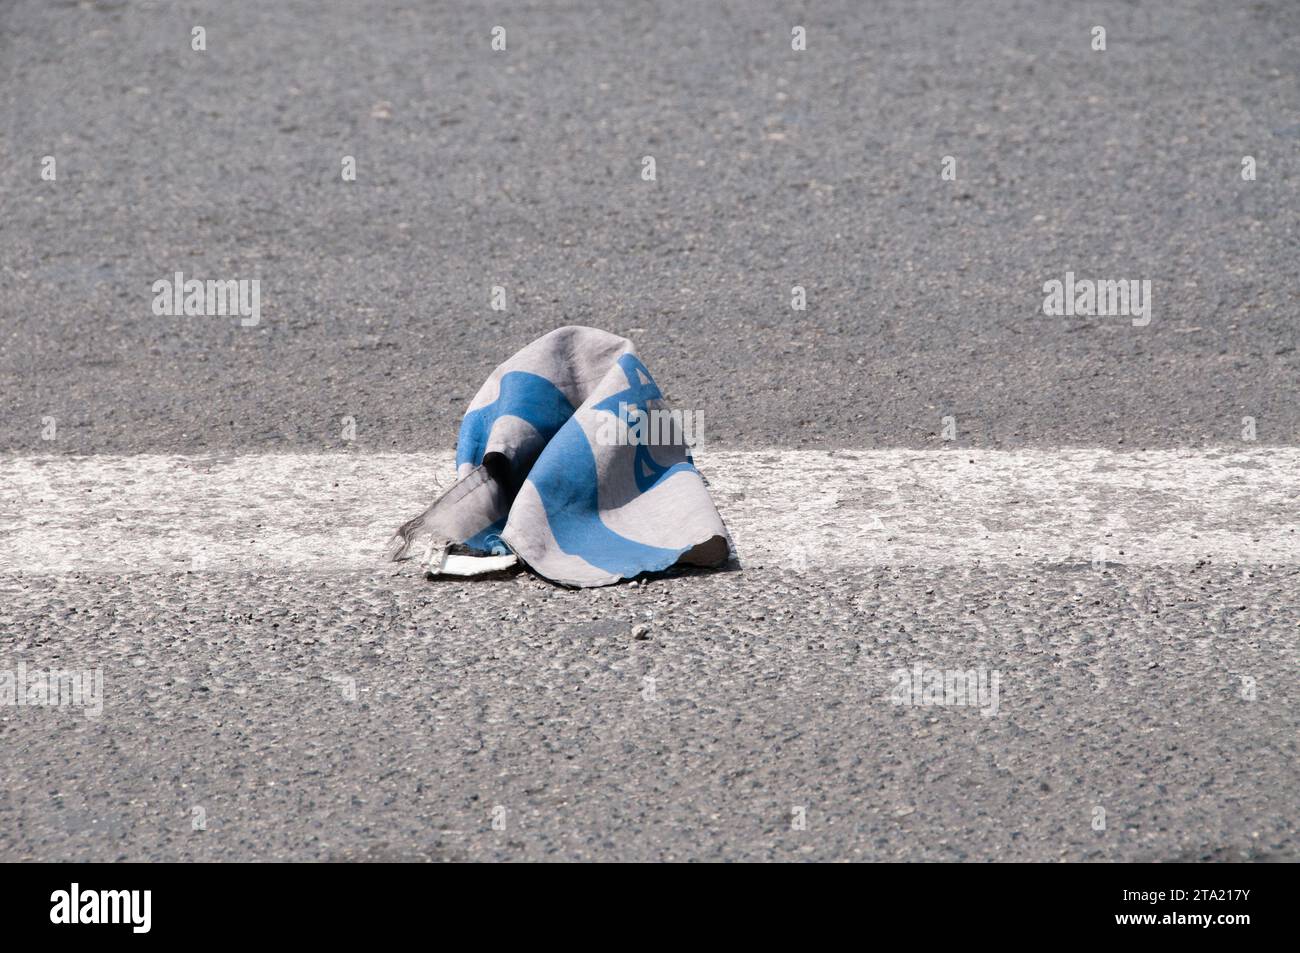 A small, dirty, blue and white flag of the State of Israel lies on asphalt pavement after falling from a car. Stock Photo